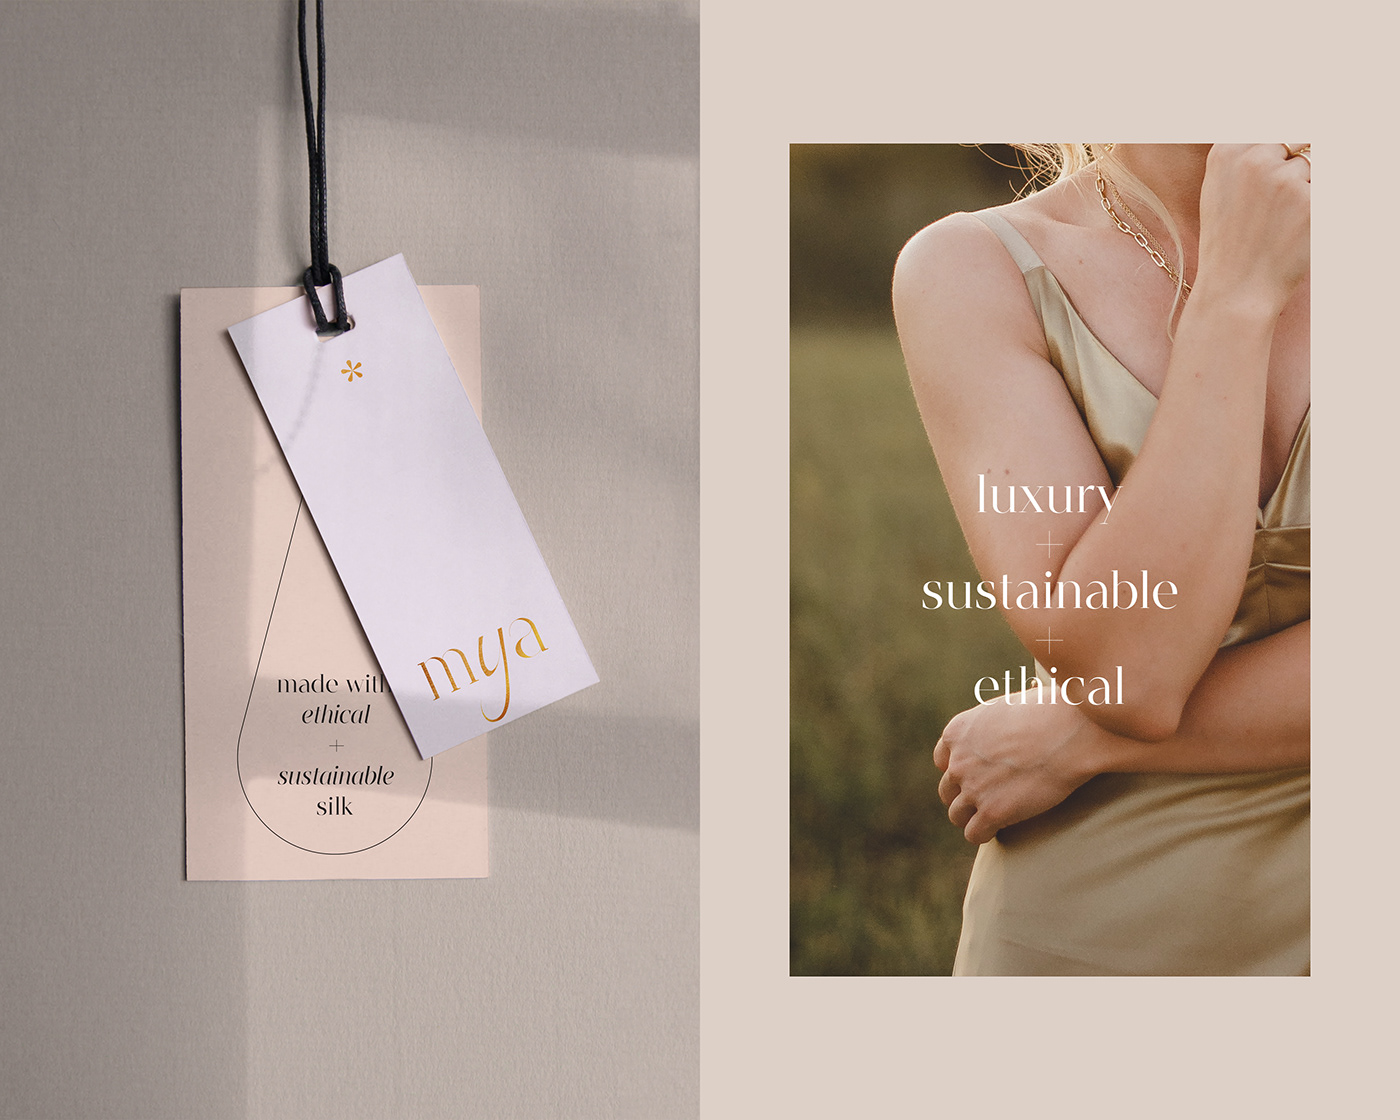 clothing tags and tagline of Mya